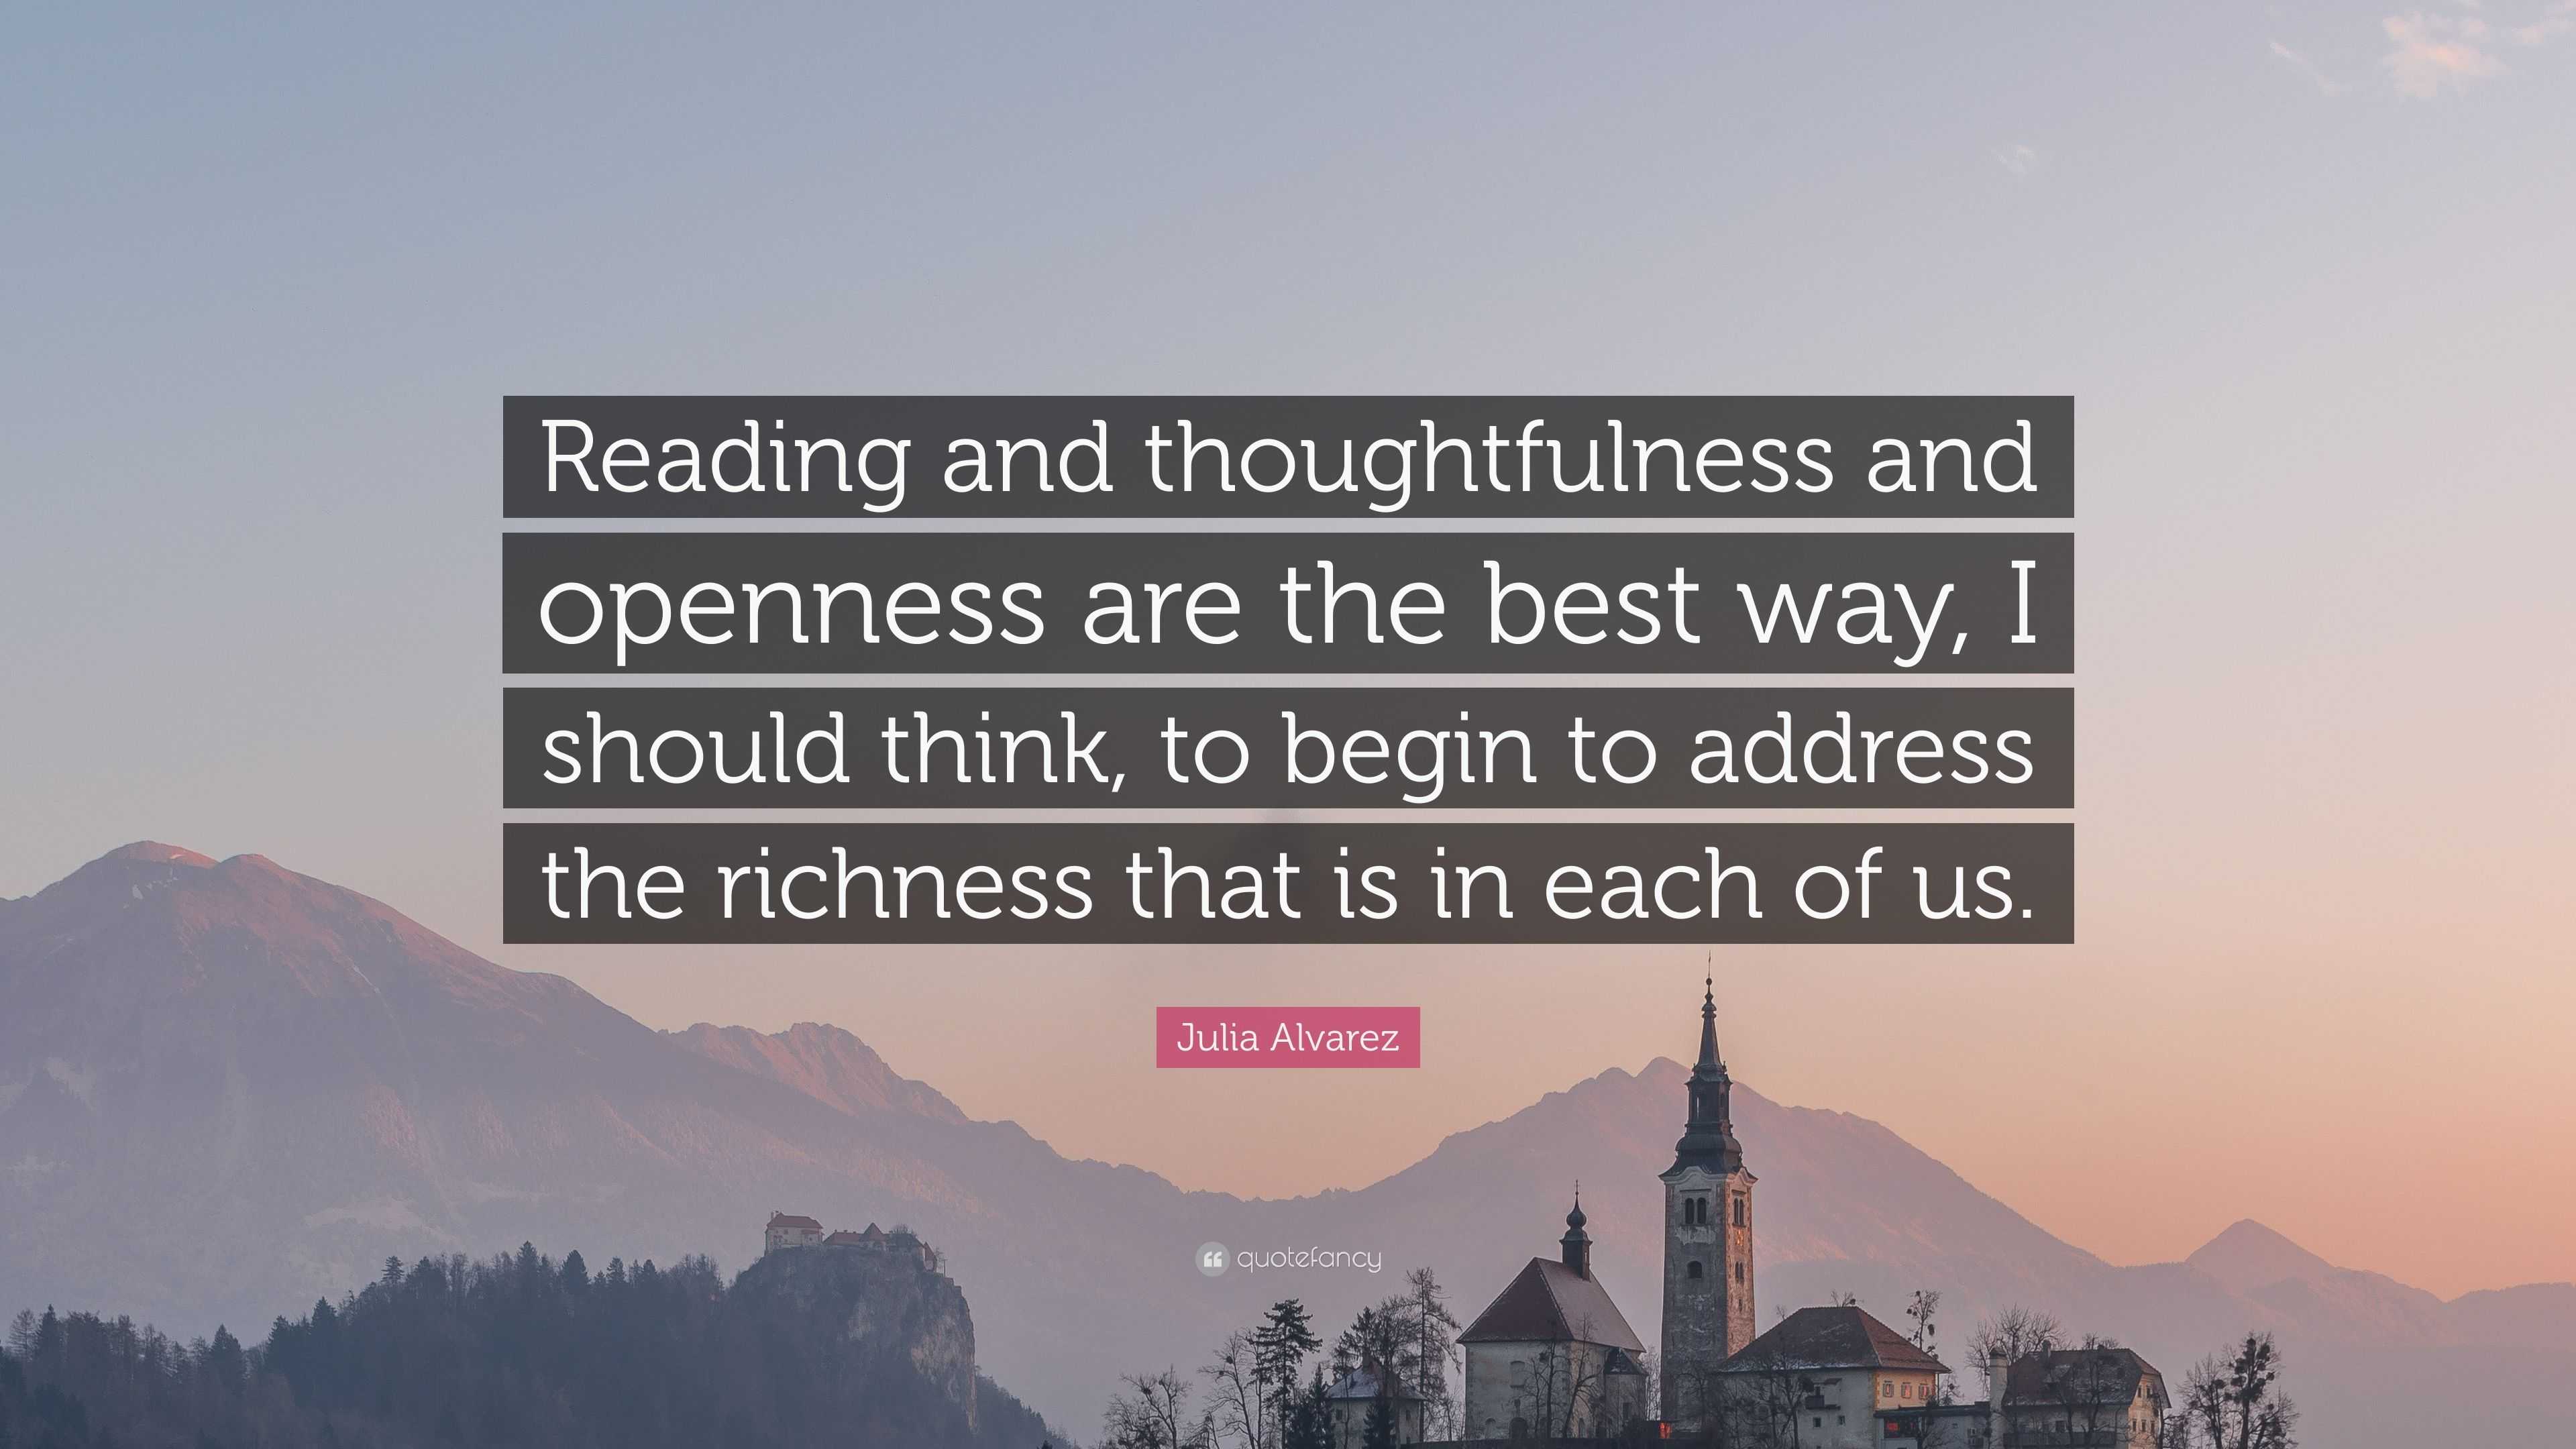 Julia Alvarez Quote: “Reading and thoughtfulness and openness are the ...